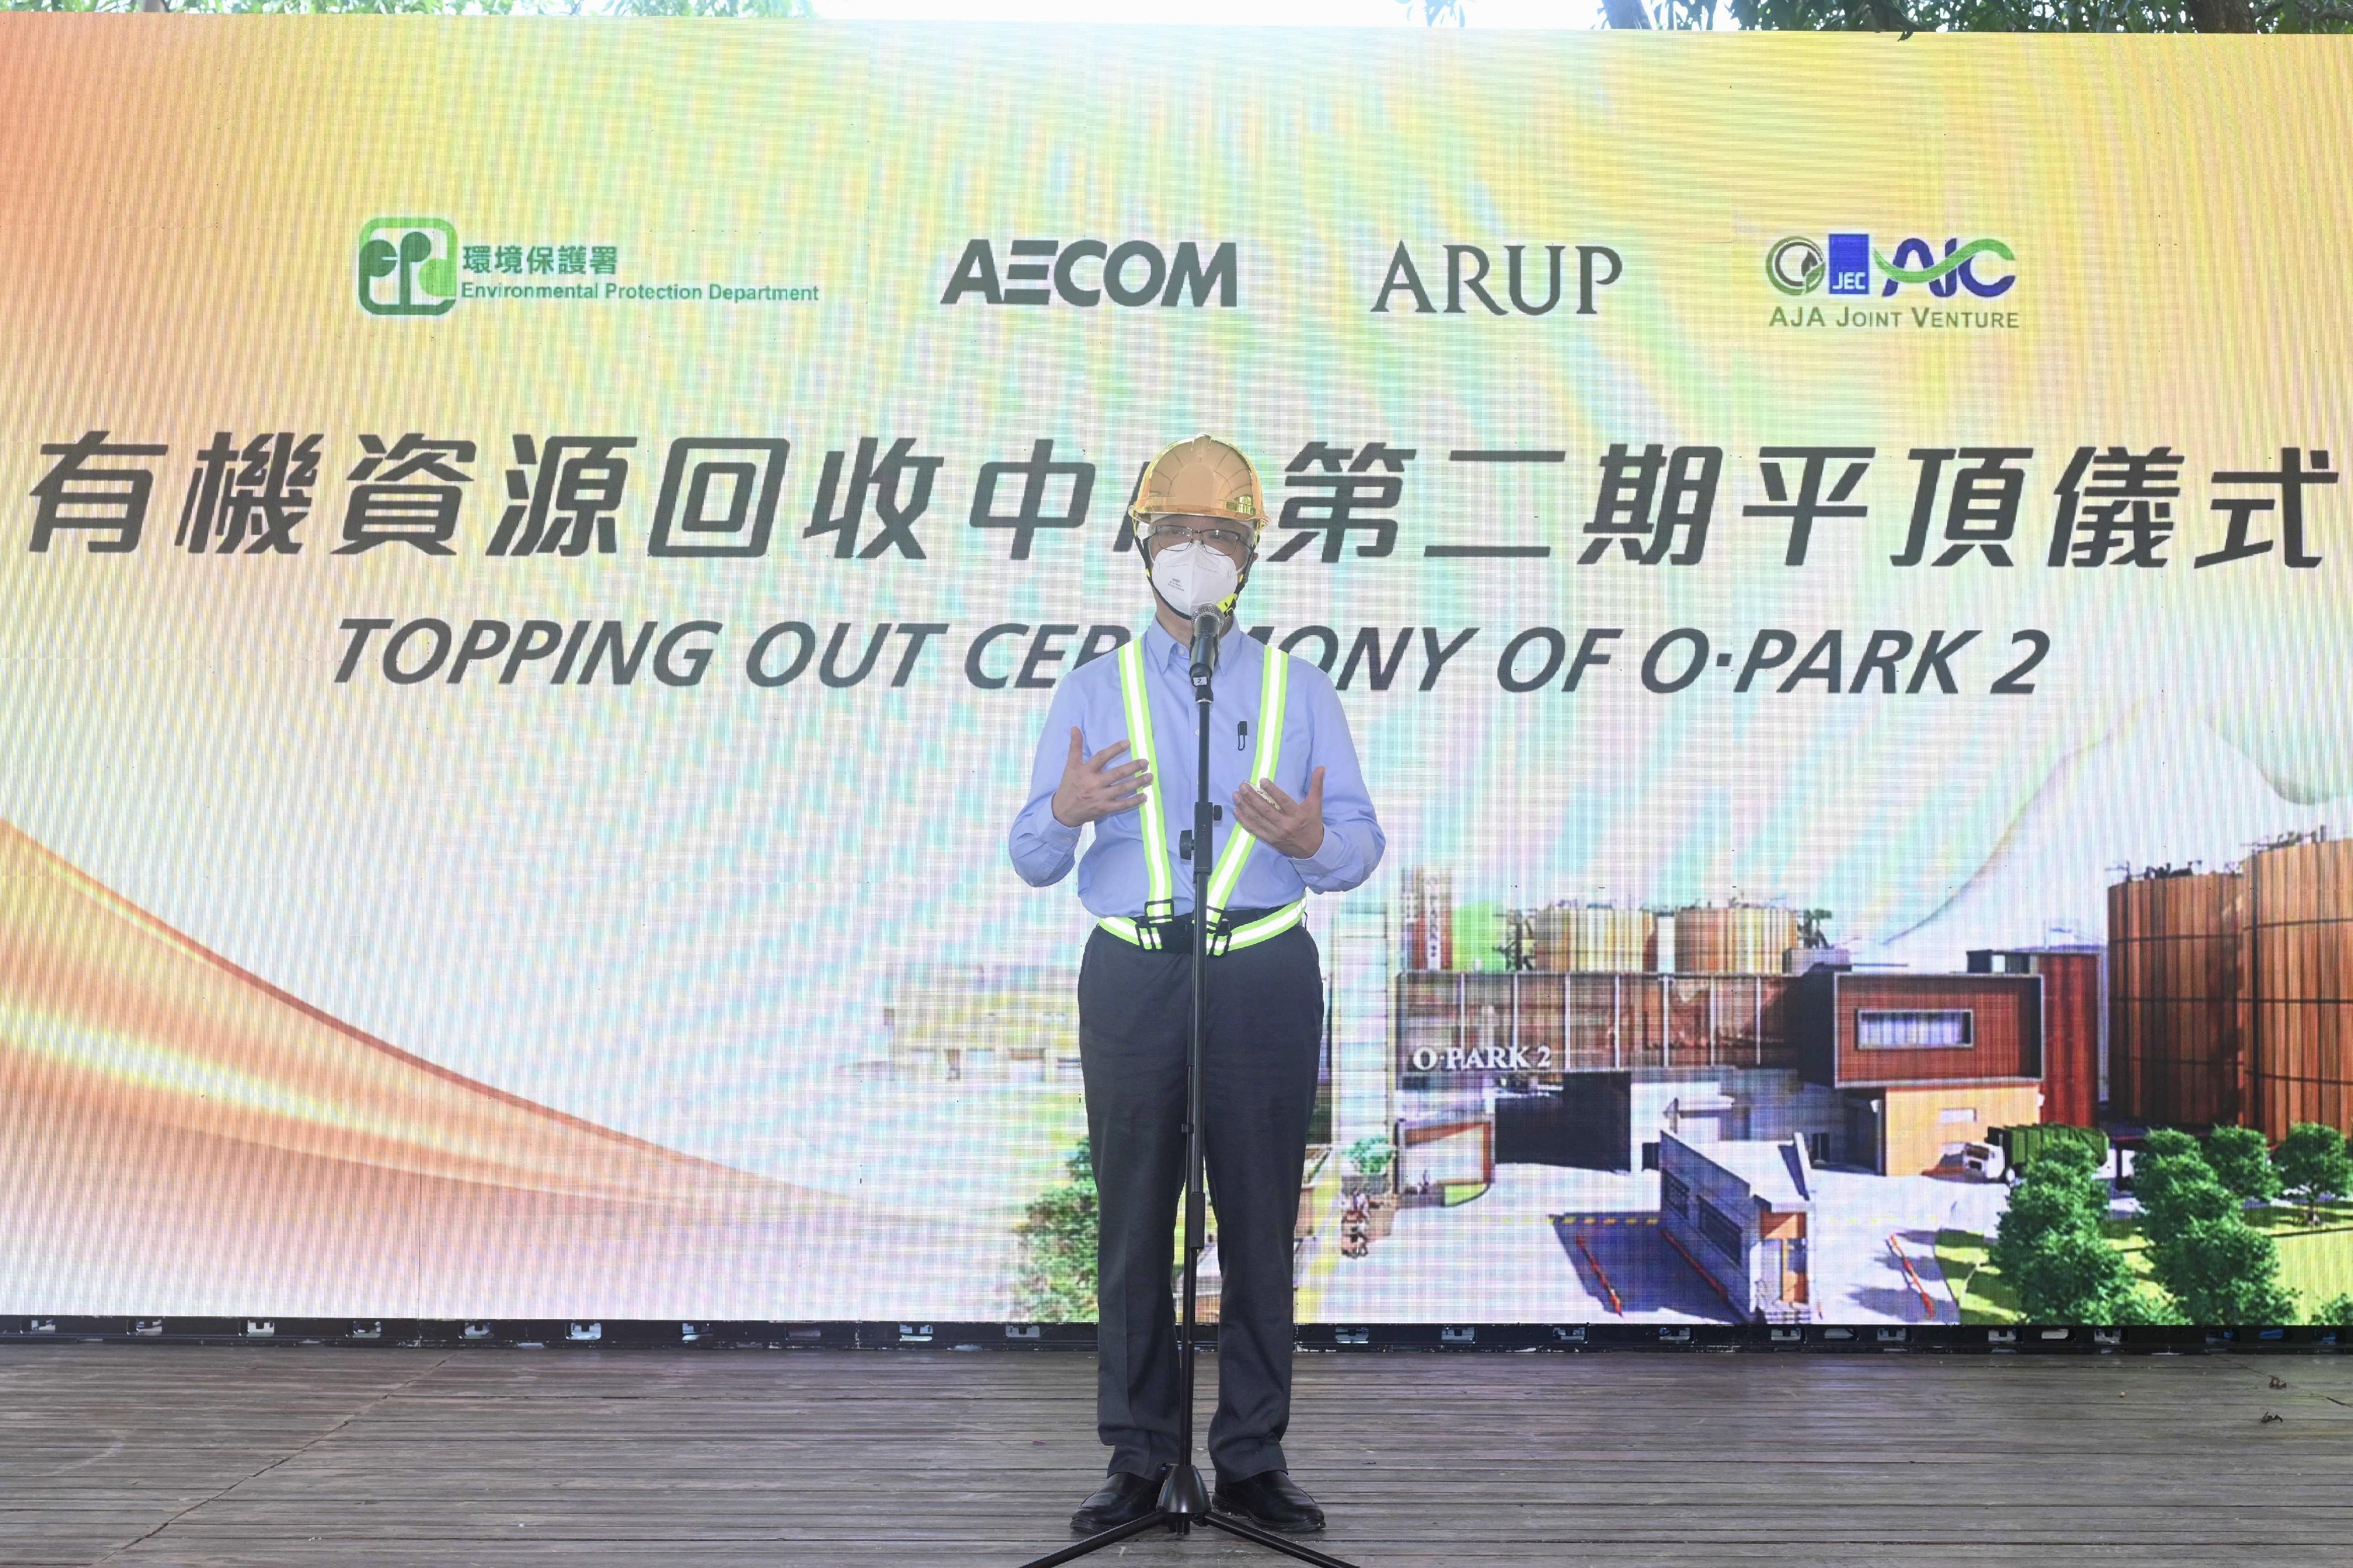 The Secretary for Environment and Ecology, Mr Tse Chin-wan, today (October 6) attended the topping-out ceremony of the Organic Resources Recovery Centre Phase 2 (O · PARK2) of the Environmental Protection Department. Photo shows Mr Tse addressing the ceremony.